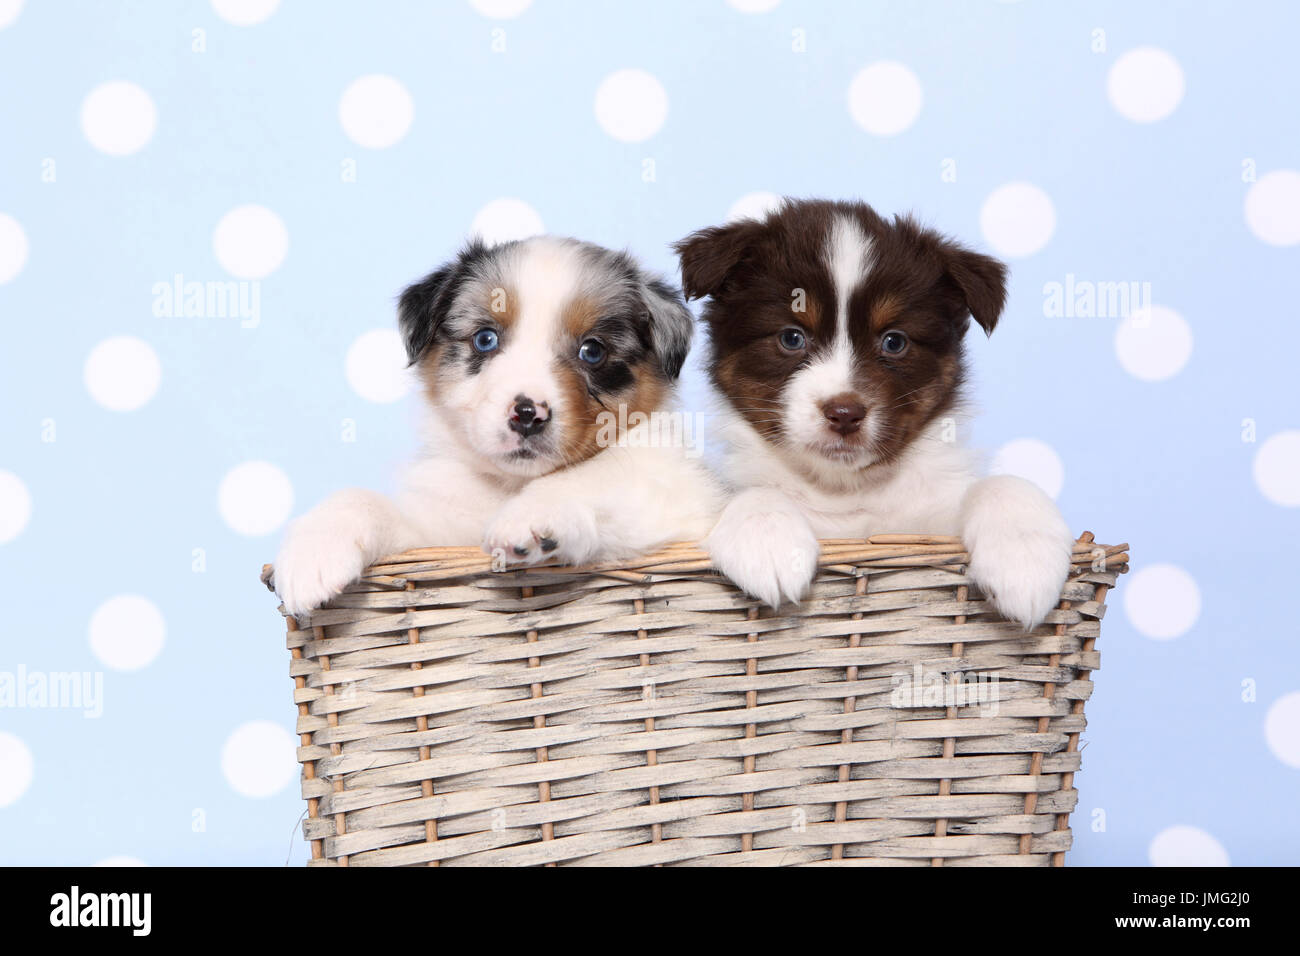 Australian Shepherd. Two puppies (6 weeks old) sitting in a wicker basket. Studio picture against a blue background with white polka dots. Germany Stock Photo